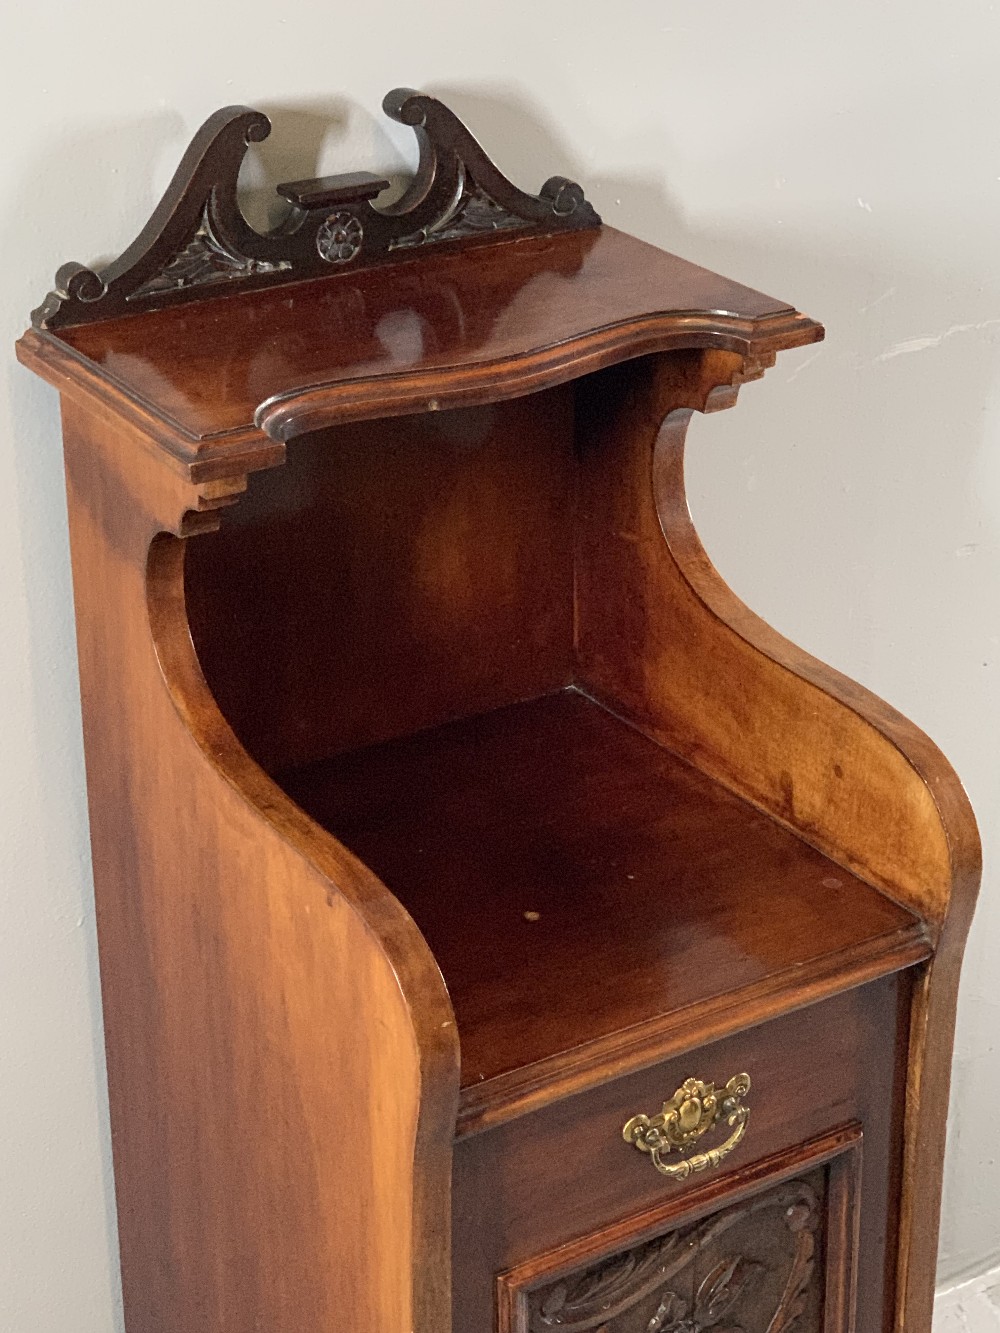 CIRCA 1900 MAHOGANY COAL PURDONIUM with shaped upper shelf, drop down front with fancy brass - Image 2 of 4